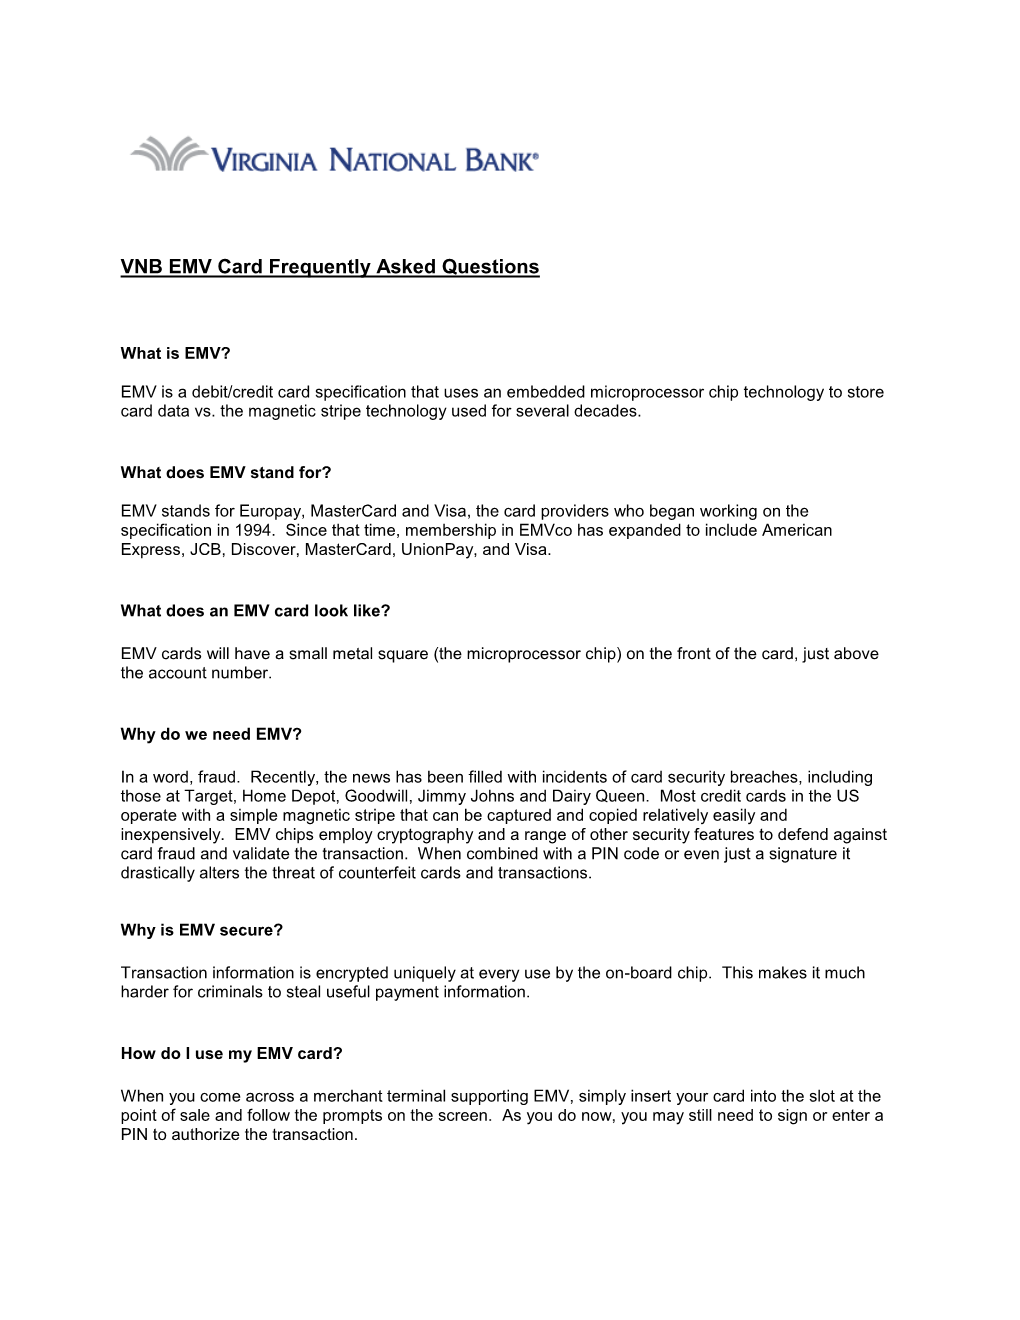 VNB EMV Card Frequently Asked Questions